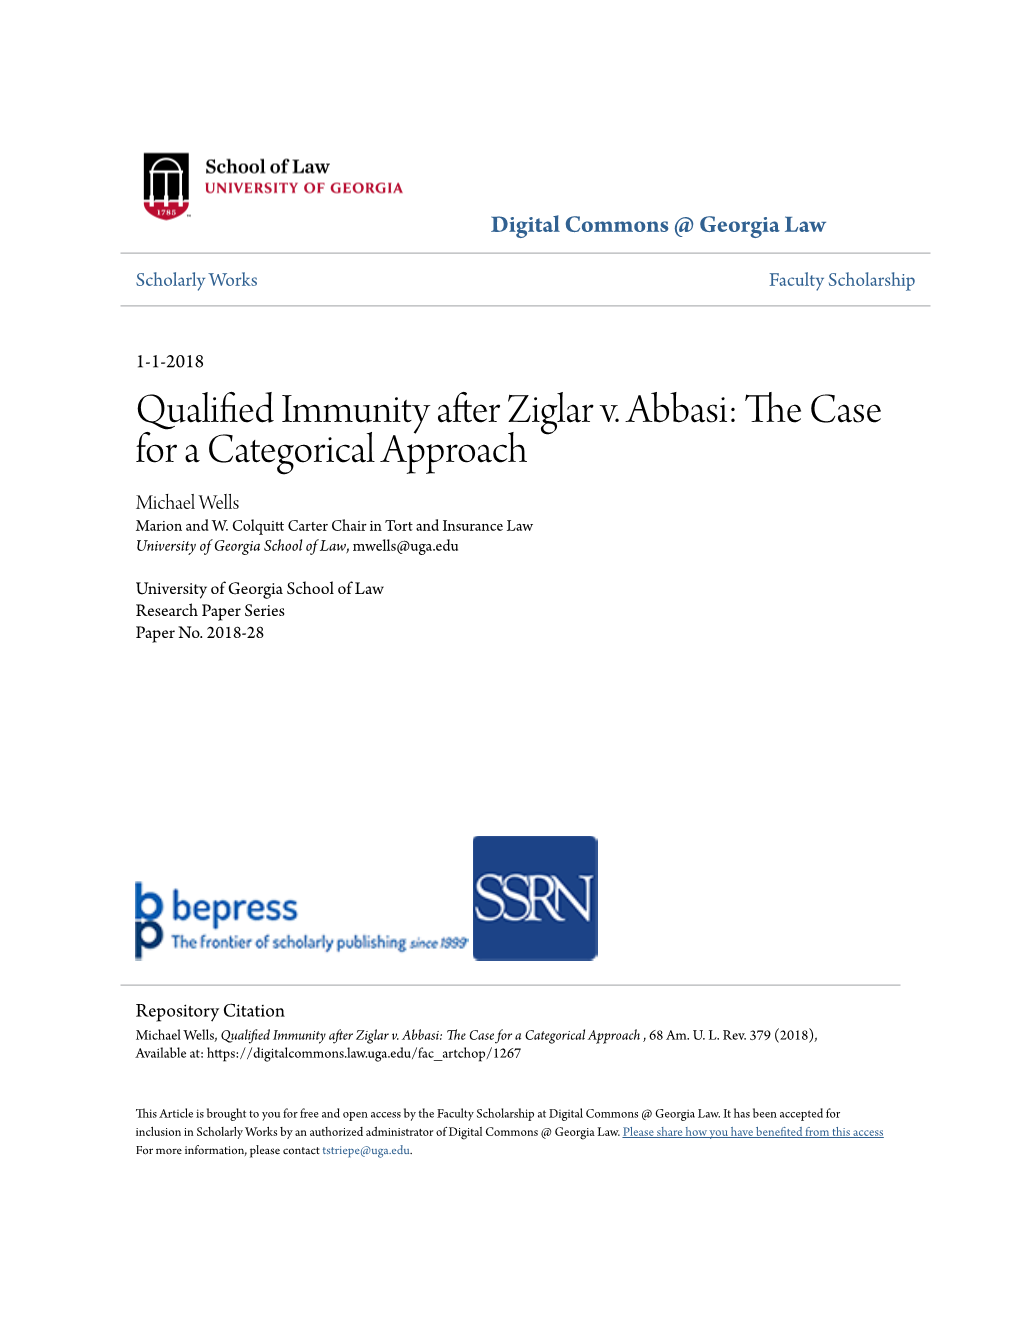 Qualified Immunity After Ziglar V. Abbasi: the Case for a Categorical Approach , 68 Am